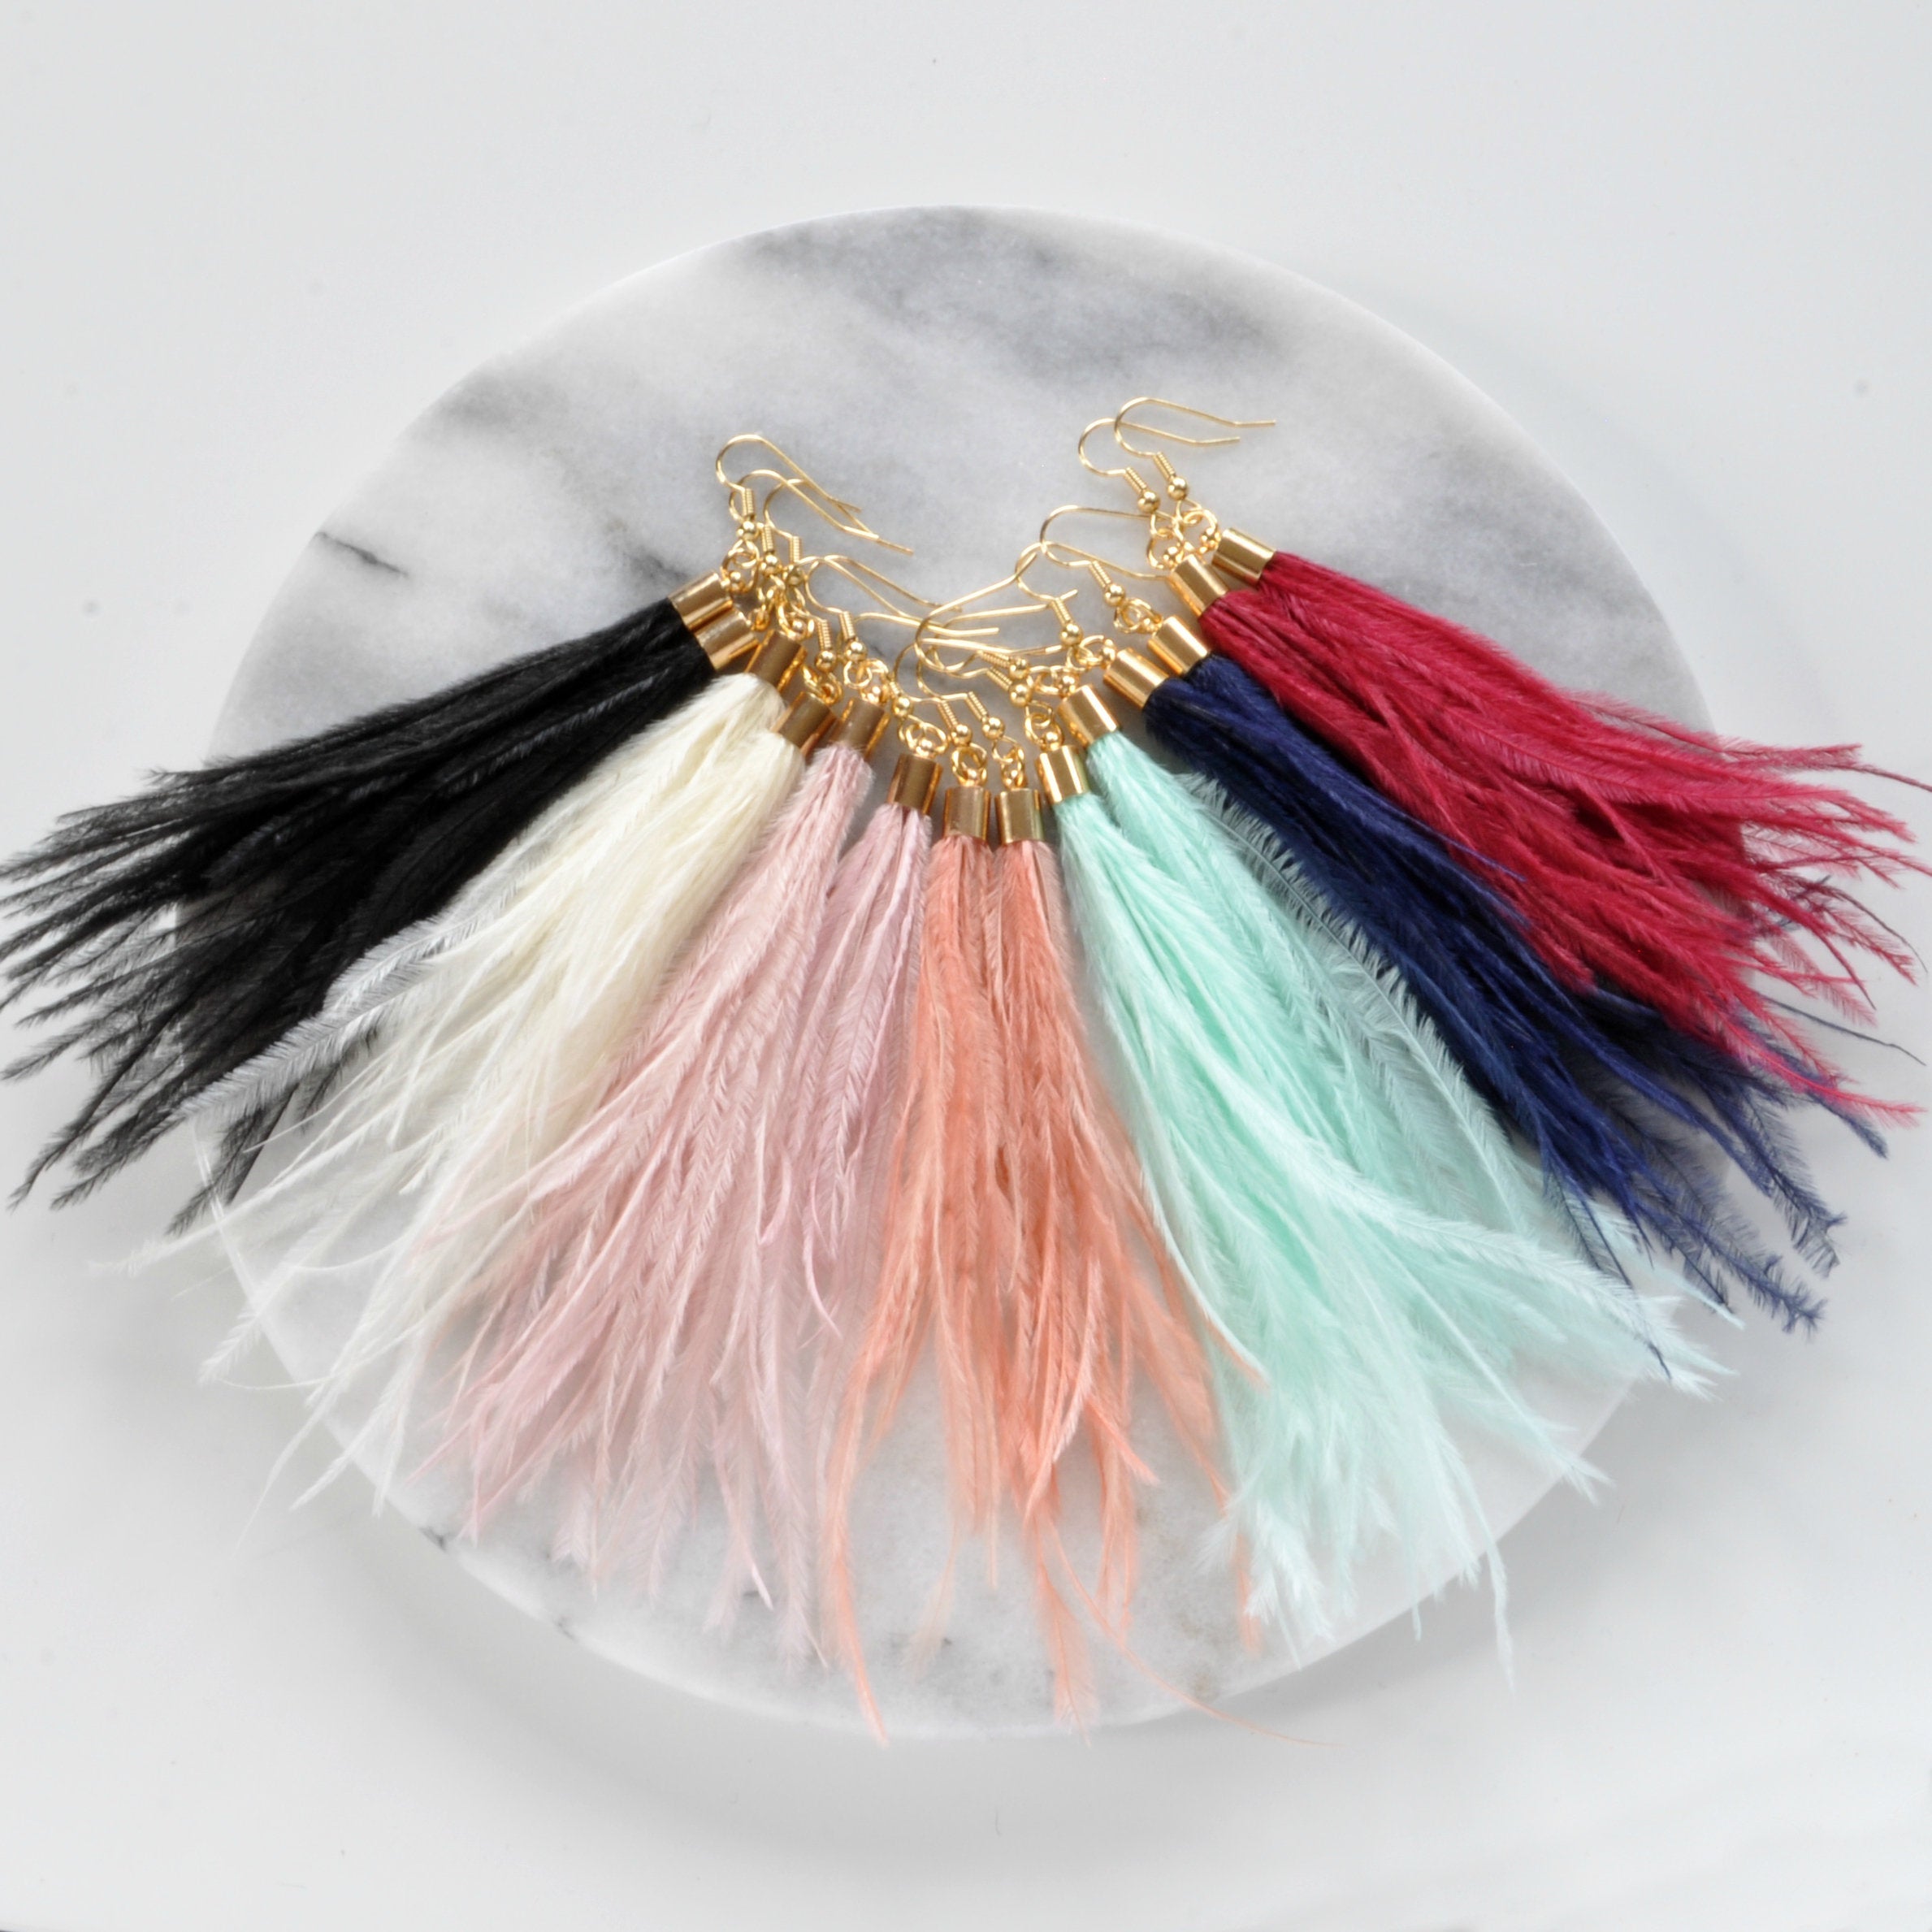 Libby & Smee Dark Red Feather Earrings with Ostrich Feathers and Gold Caps with Libby & Smee ostrich feather earrings in black, ivory, pink, peach, seafoam, and navy blue 